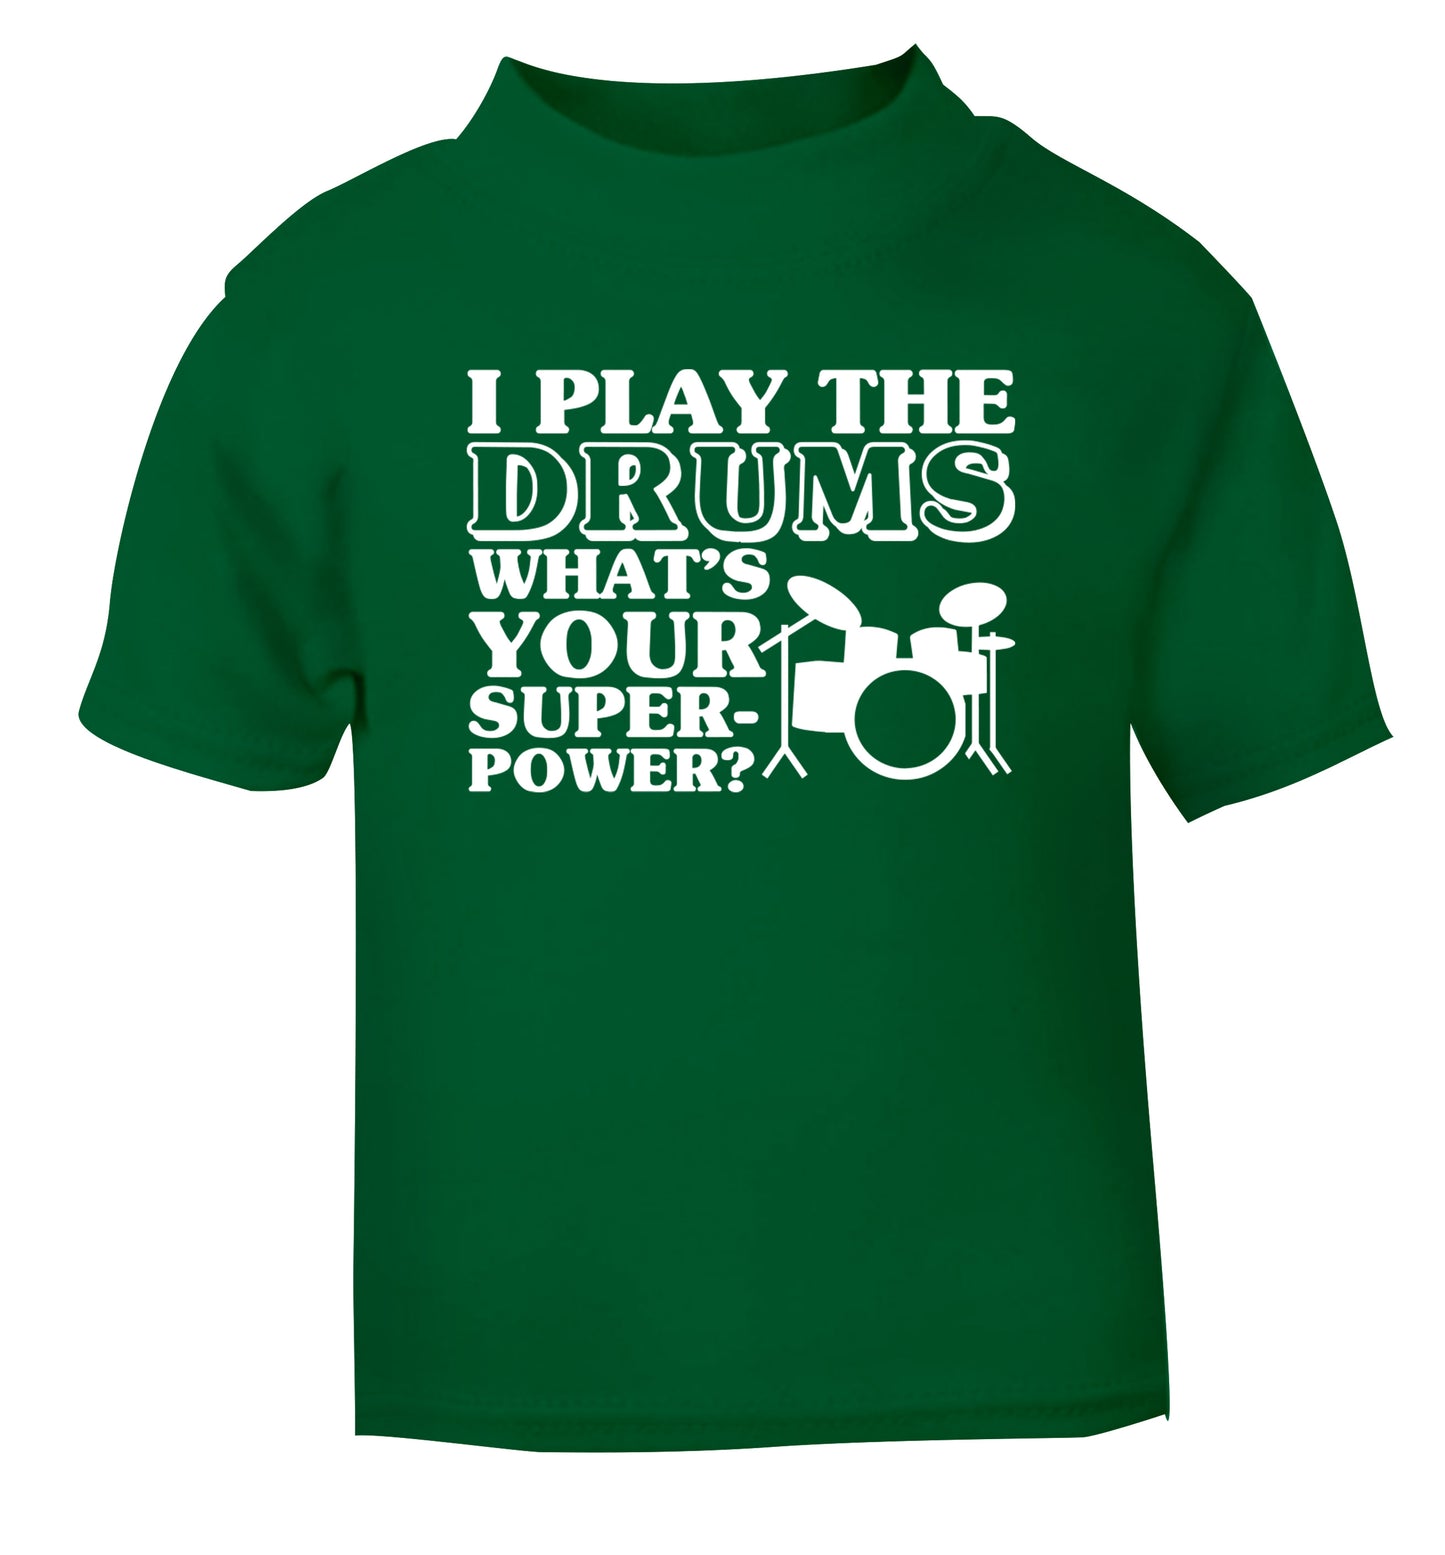 I play the drums what's your superpower? green Baby Toddler Tshirt 2 Years